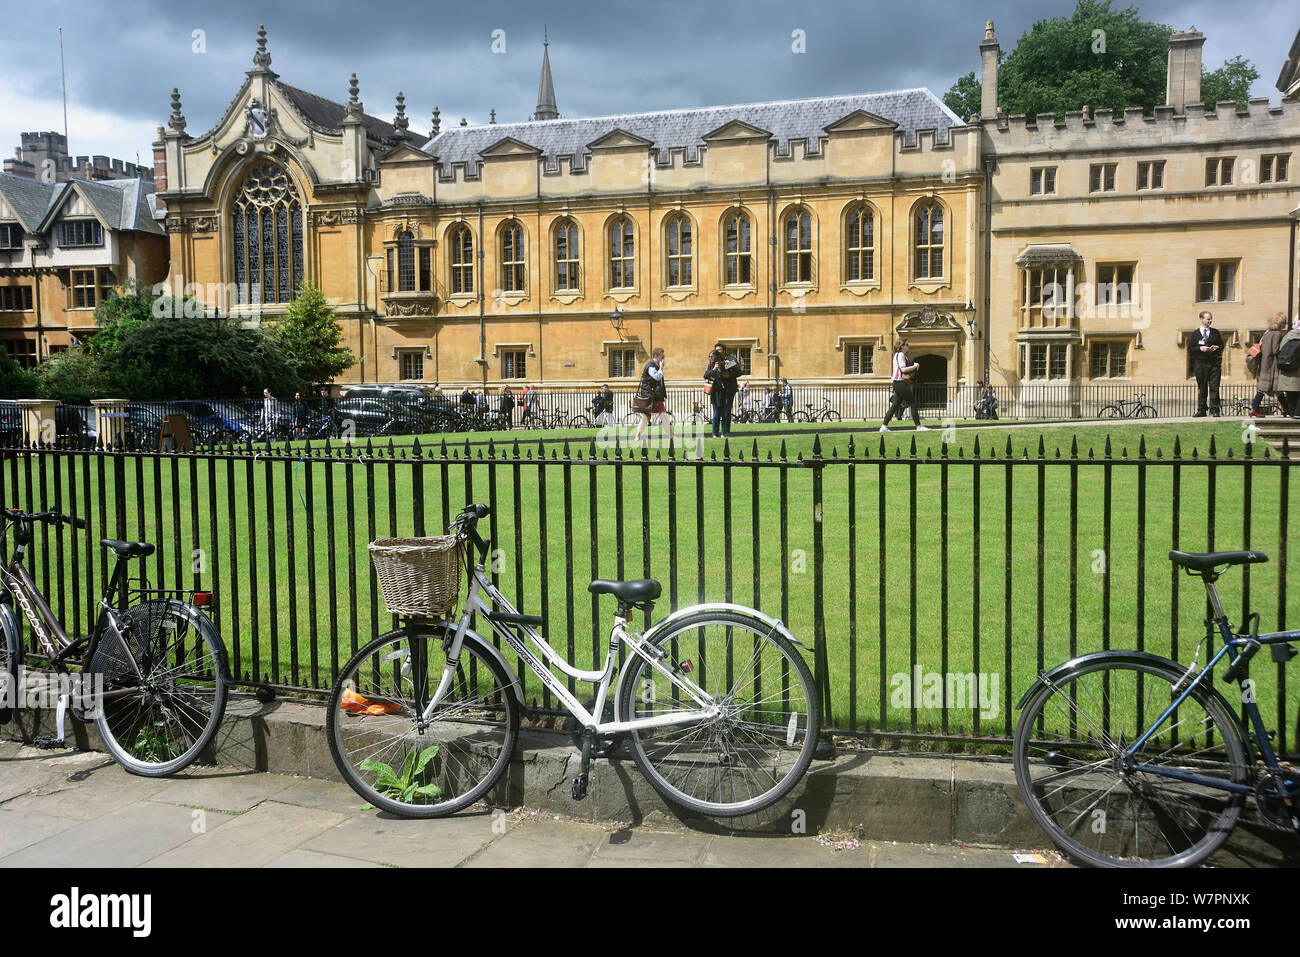 England, Oxford, Brasenose College across lawn of the Radcliffe Camera. Stock Photo